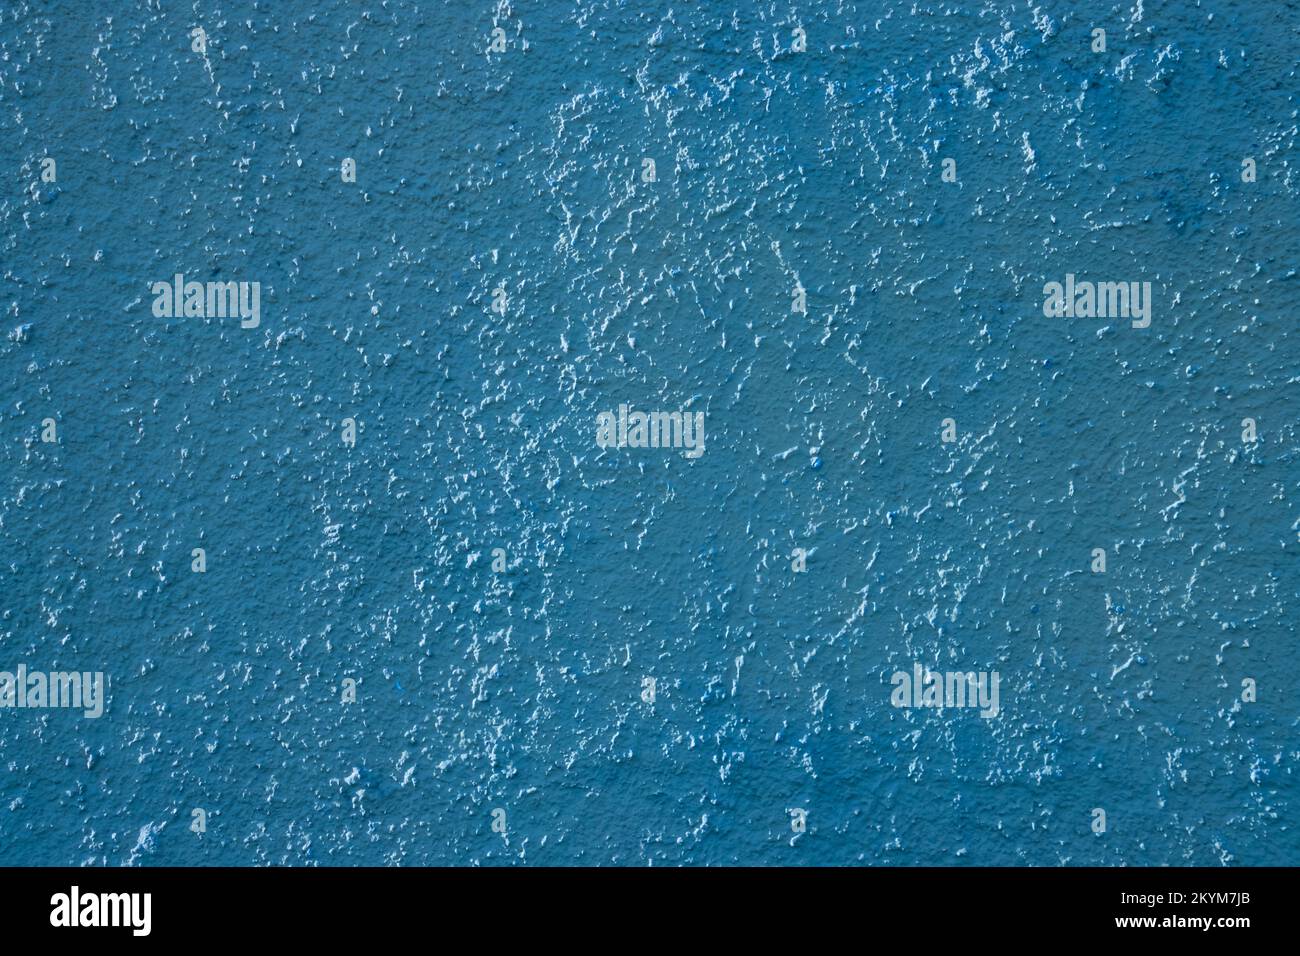 Light blue colored abstract wall background with textures of different shades of blue Stock Photo